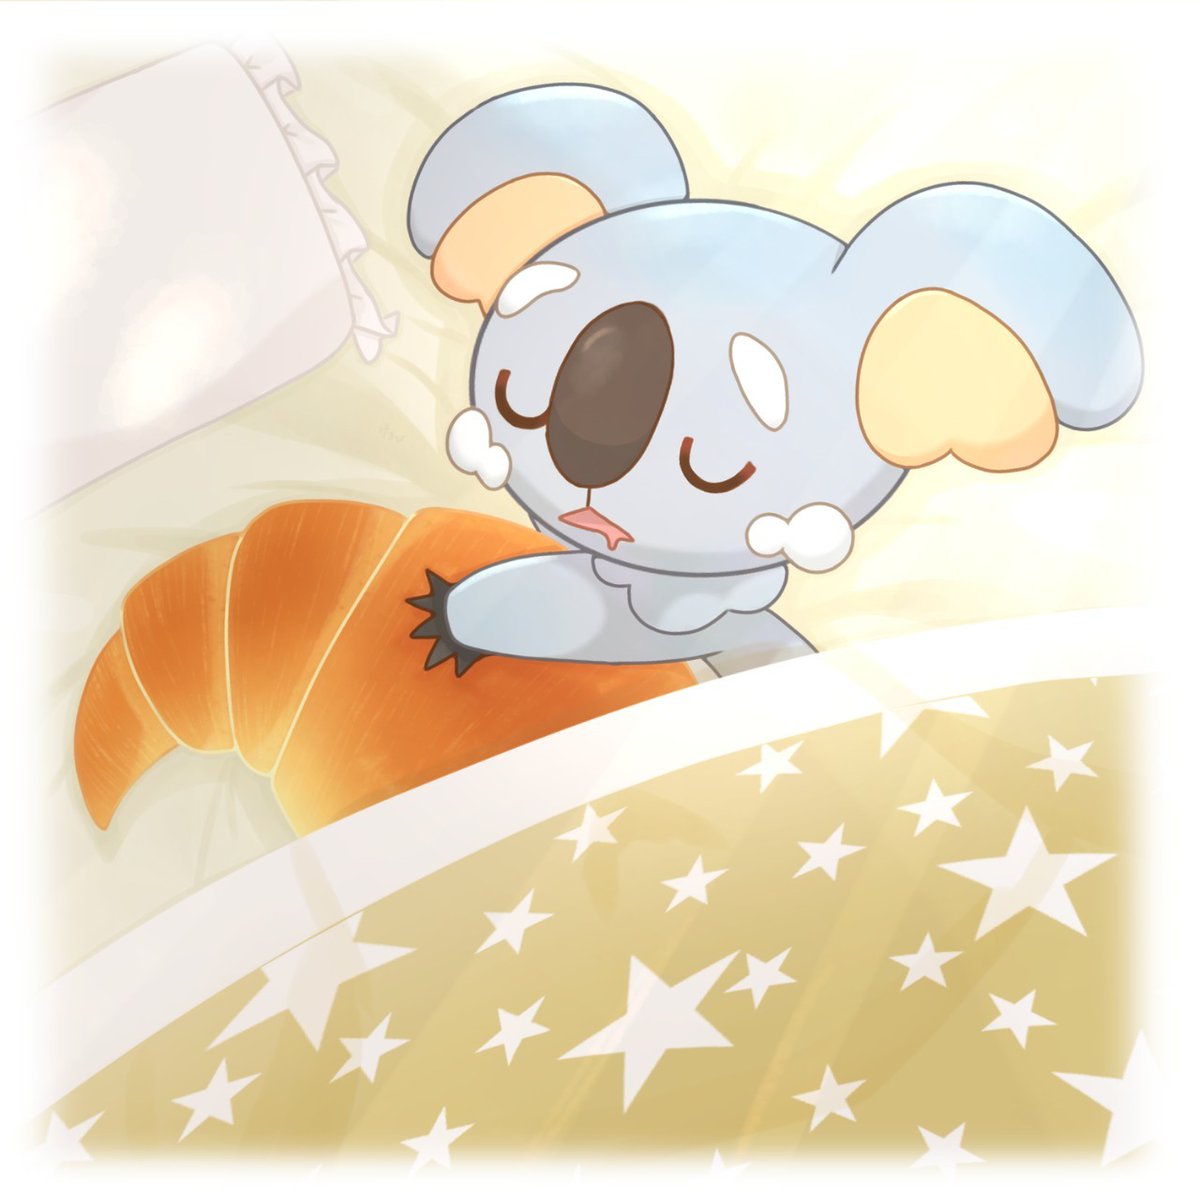 solo open mouth closed eyes lying star (symbol) pillow pokemon (creature)  illustration images